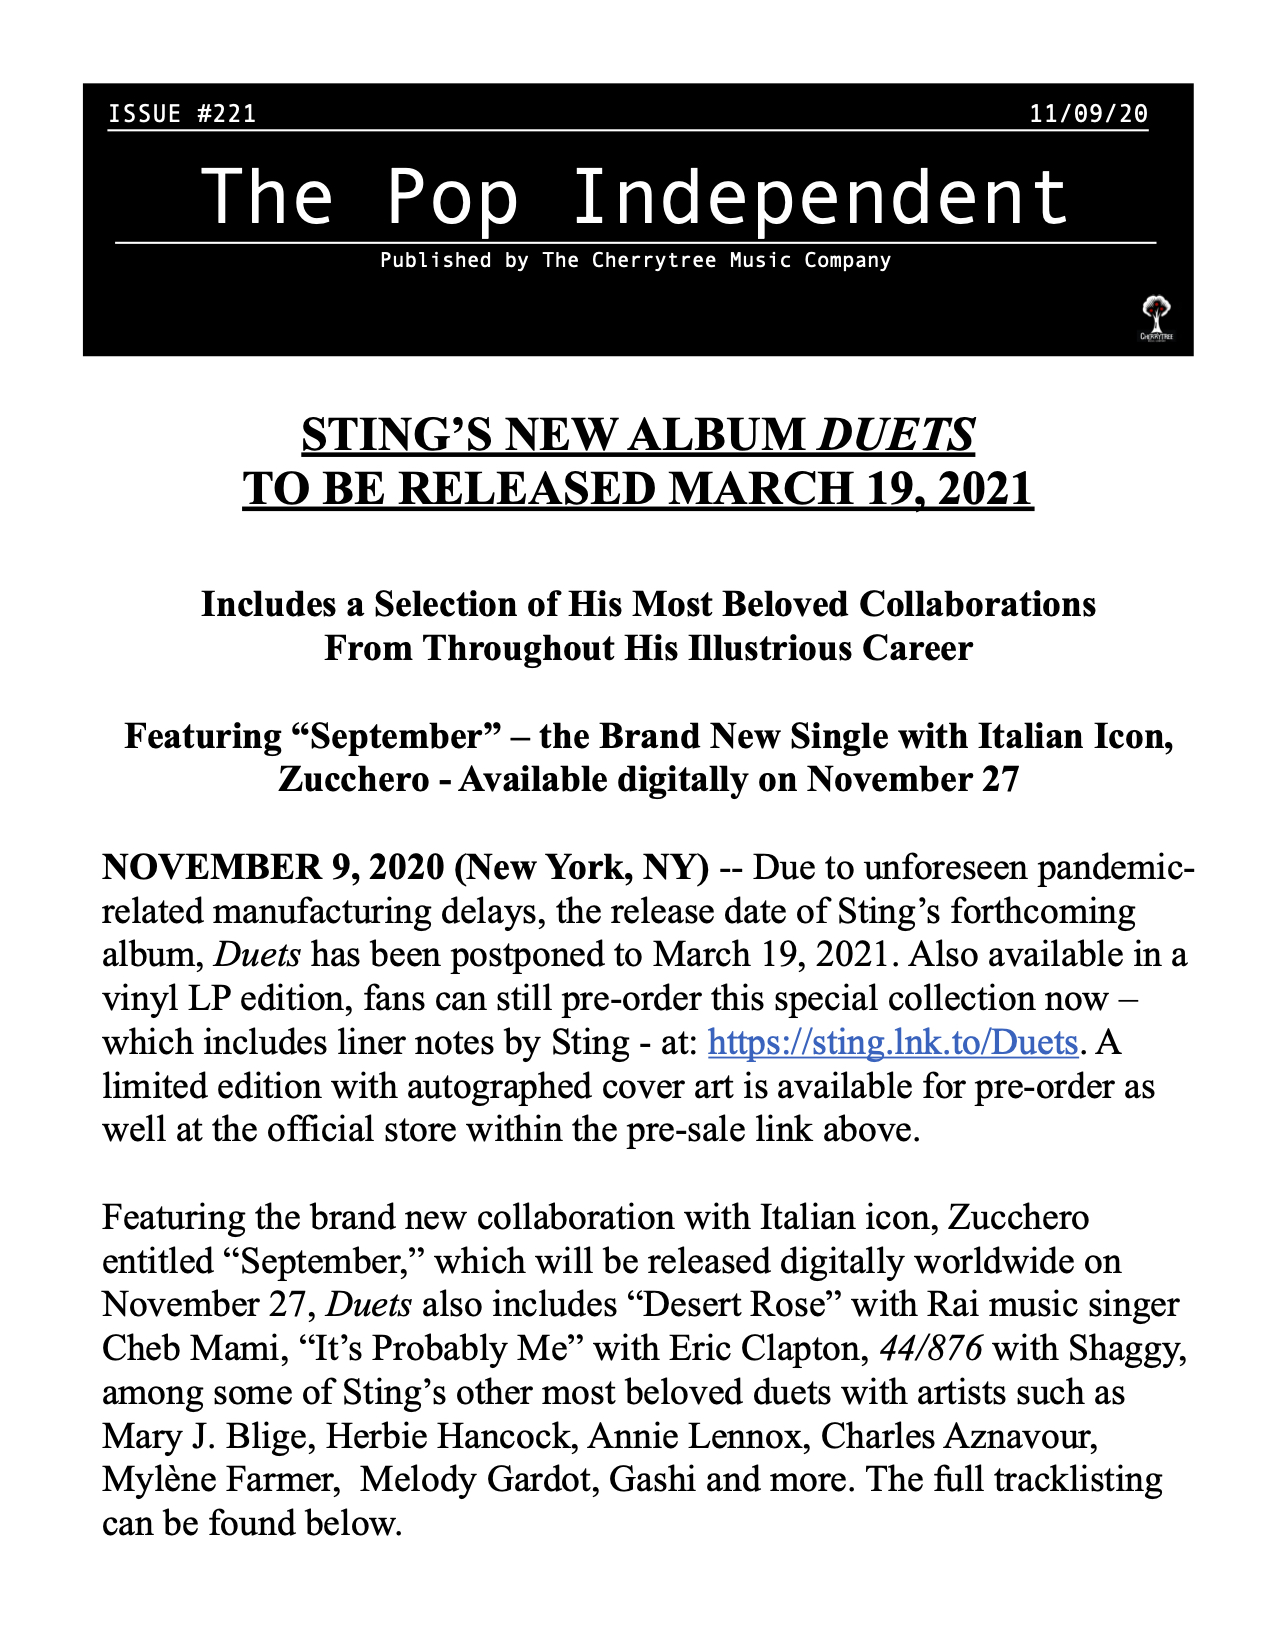 The Pop Independent, Issue 221